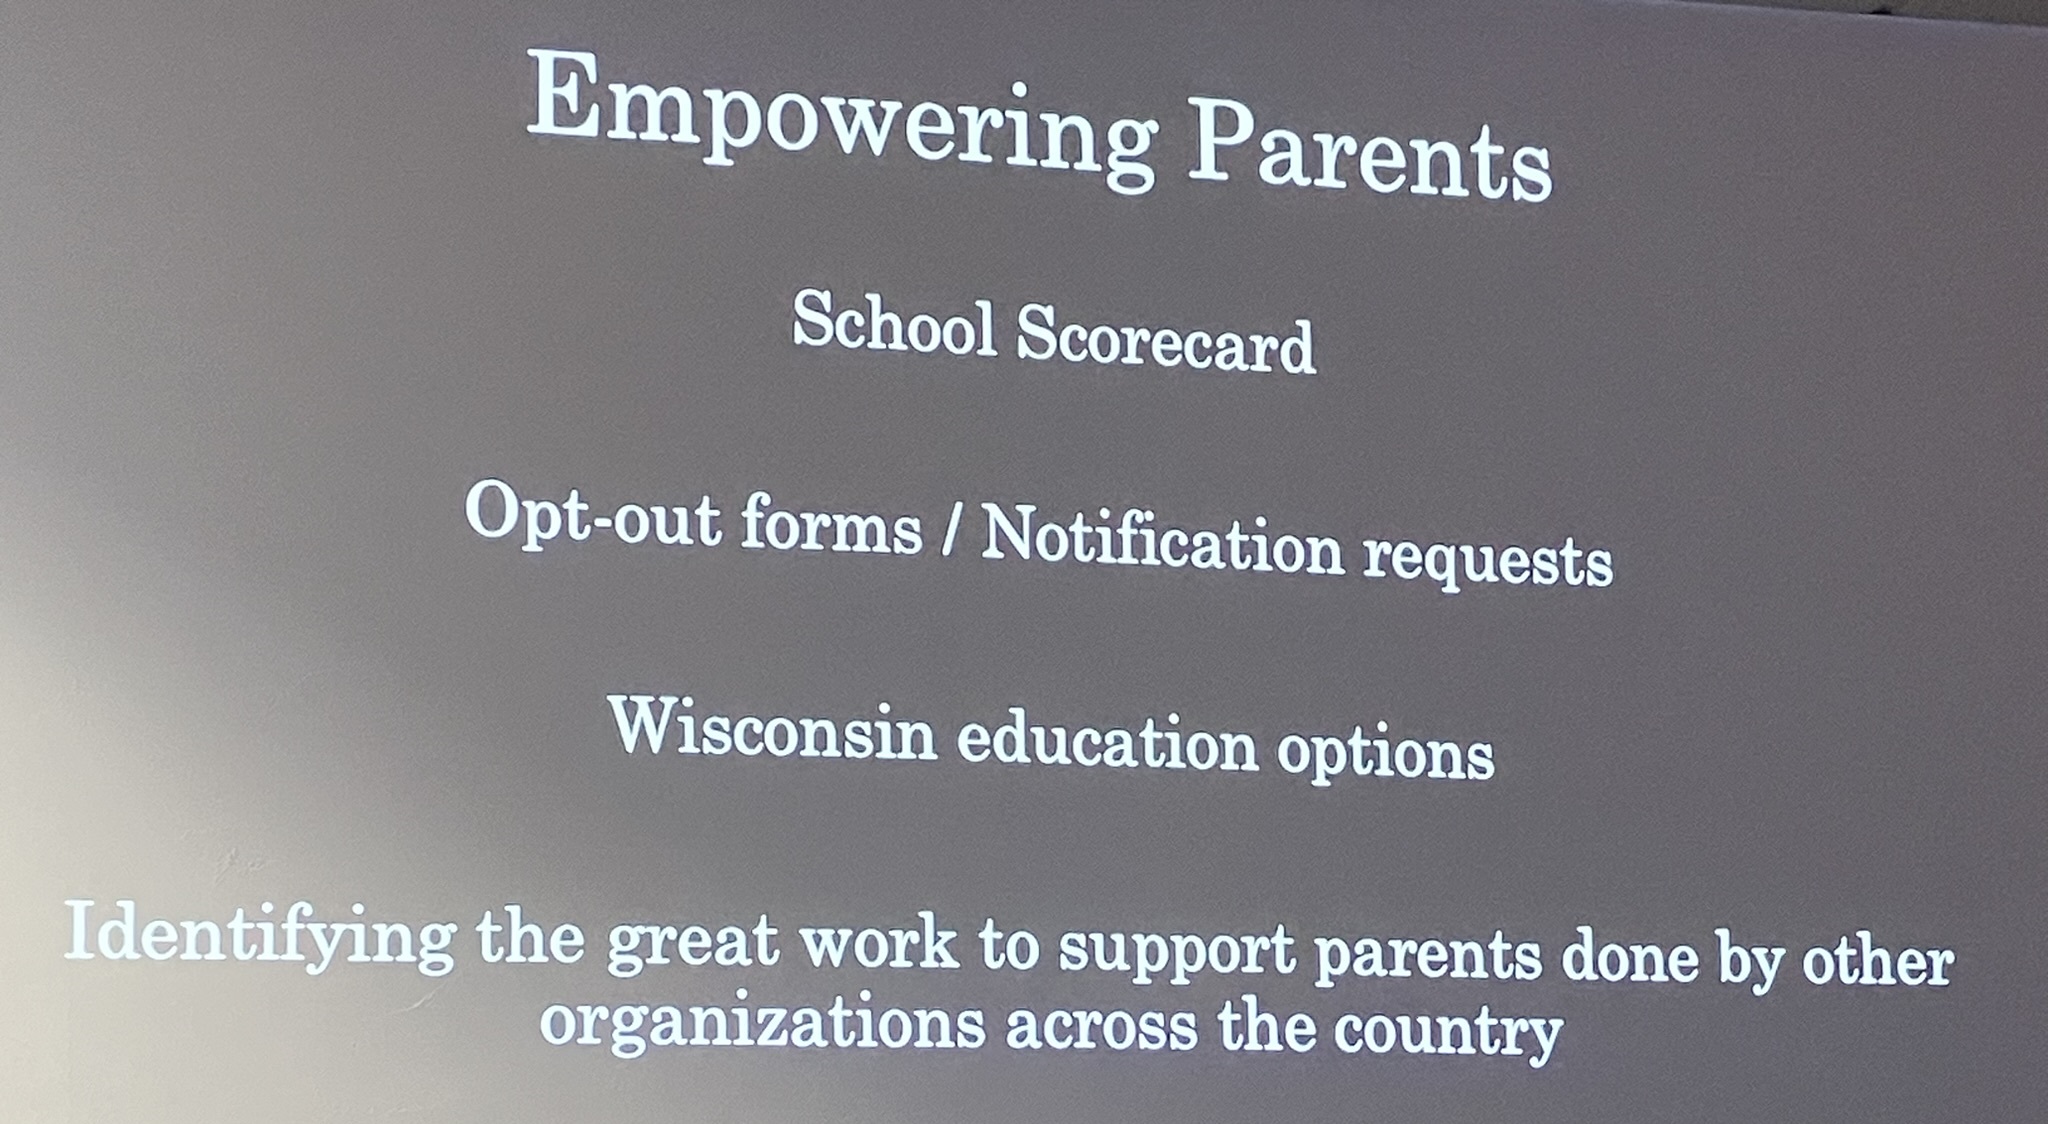 Cory Brewer discussed the parent-empowerment resources offered by the Wisconsin Institute for Law & Liberty.